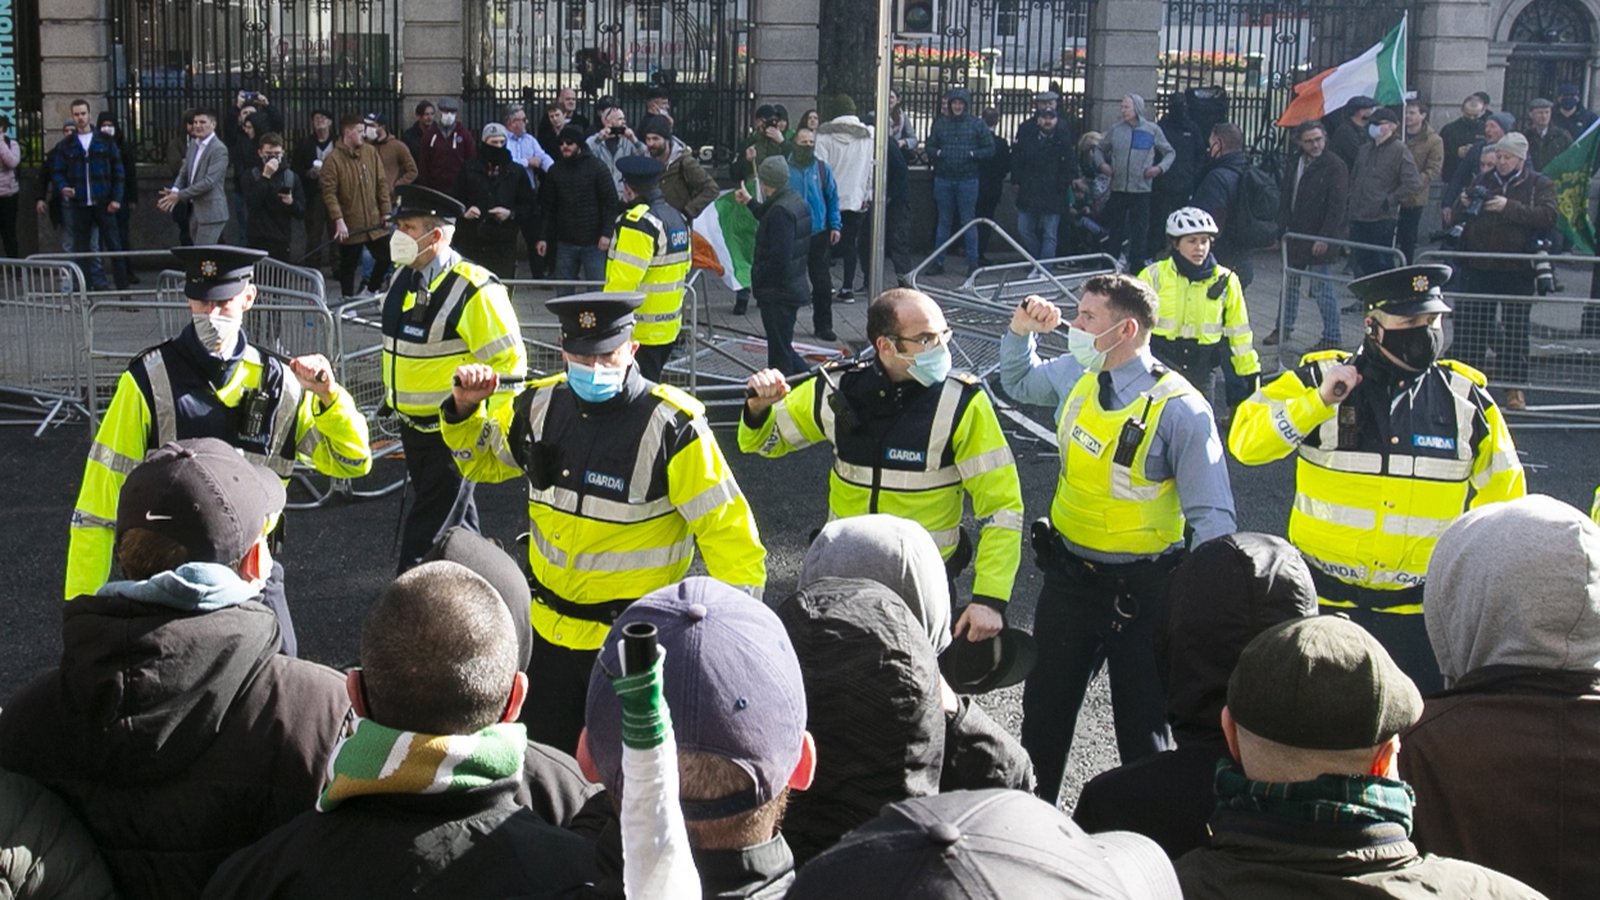 Two arrests after protesters clash outside the Dáil